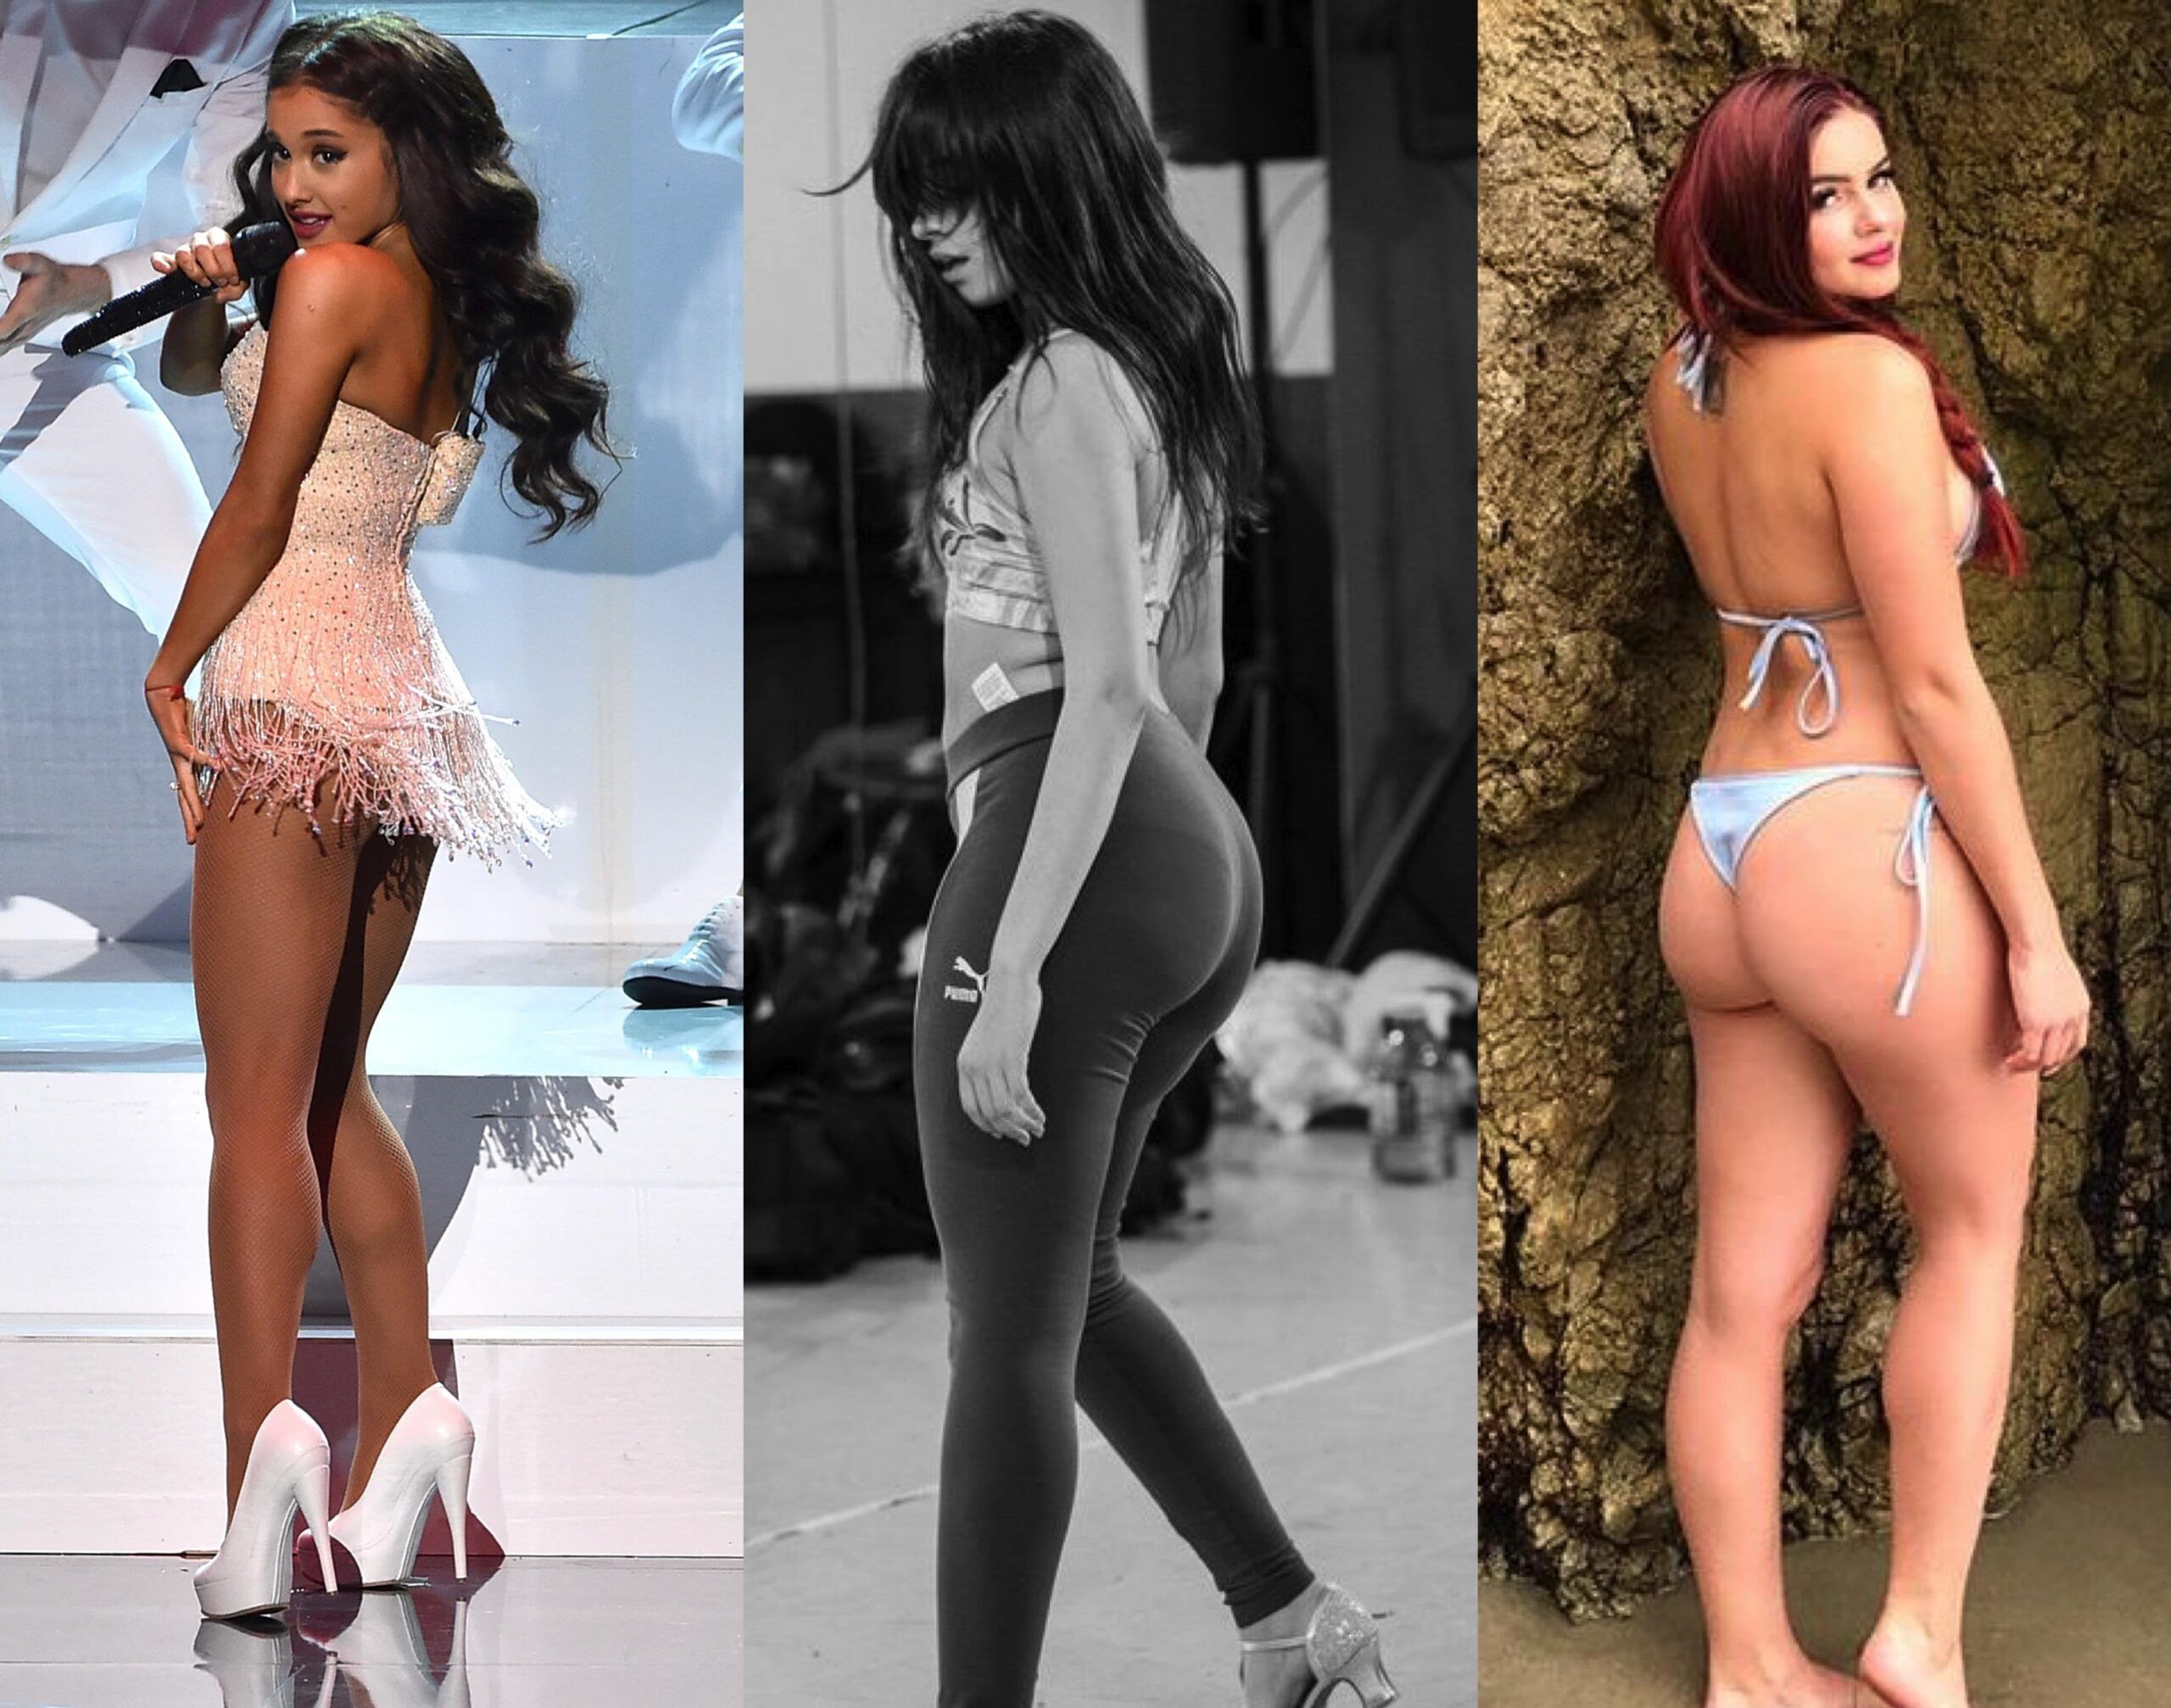 You can only fuck one of these asses Ariana Grande, Camila Cabello, Ariel Winter pic